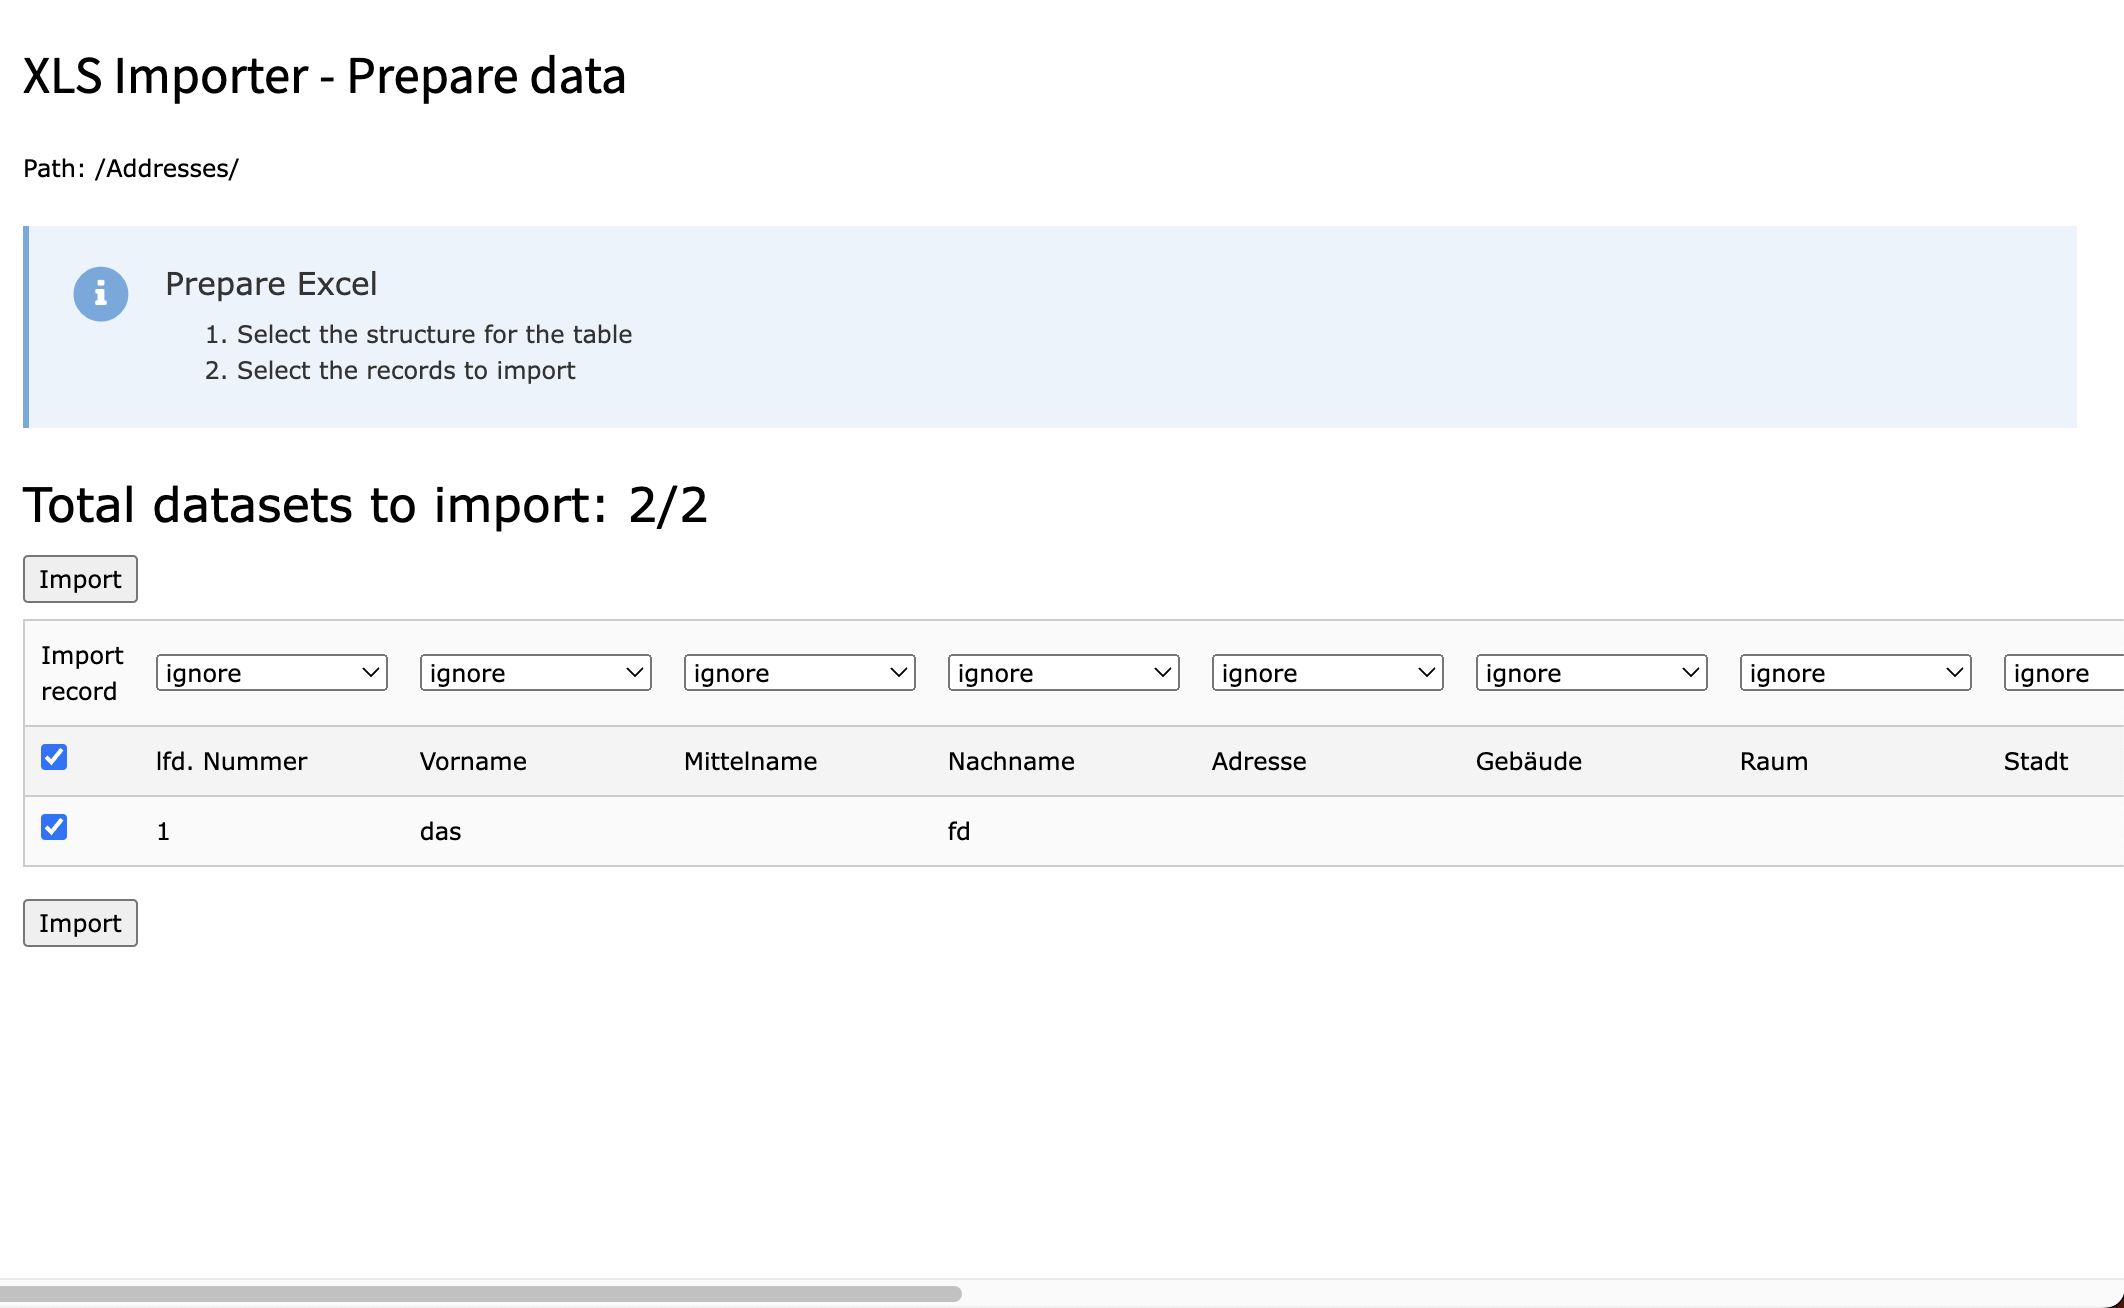 View for the pre imported data